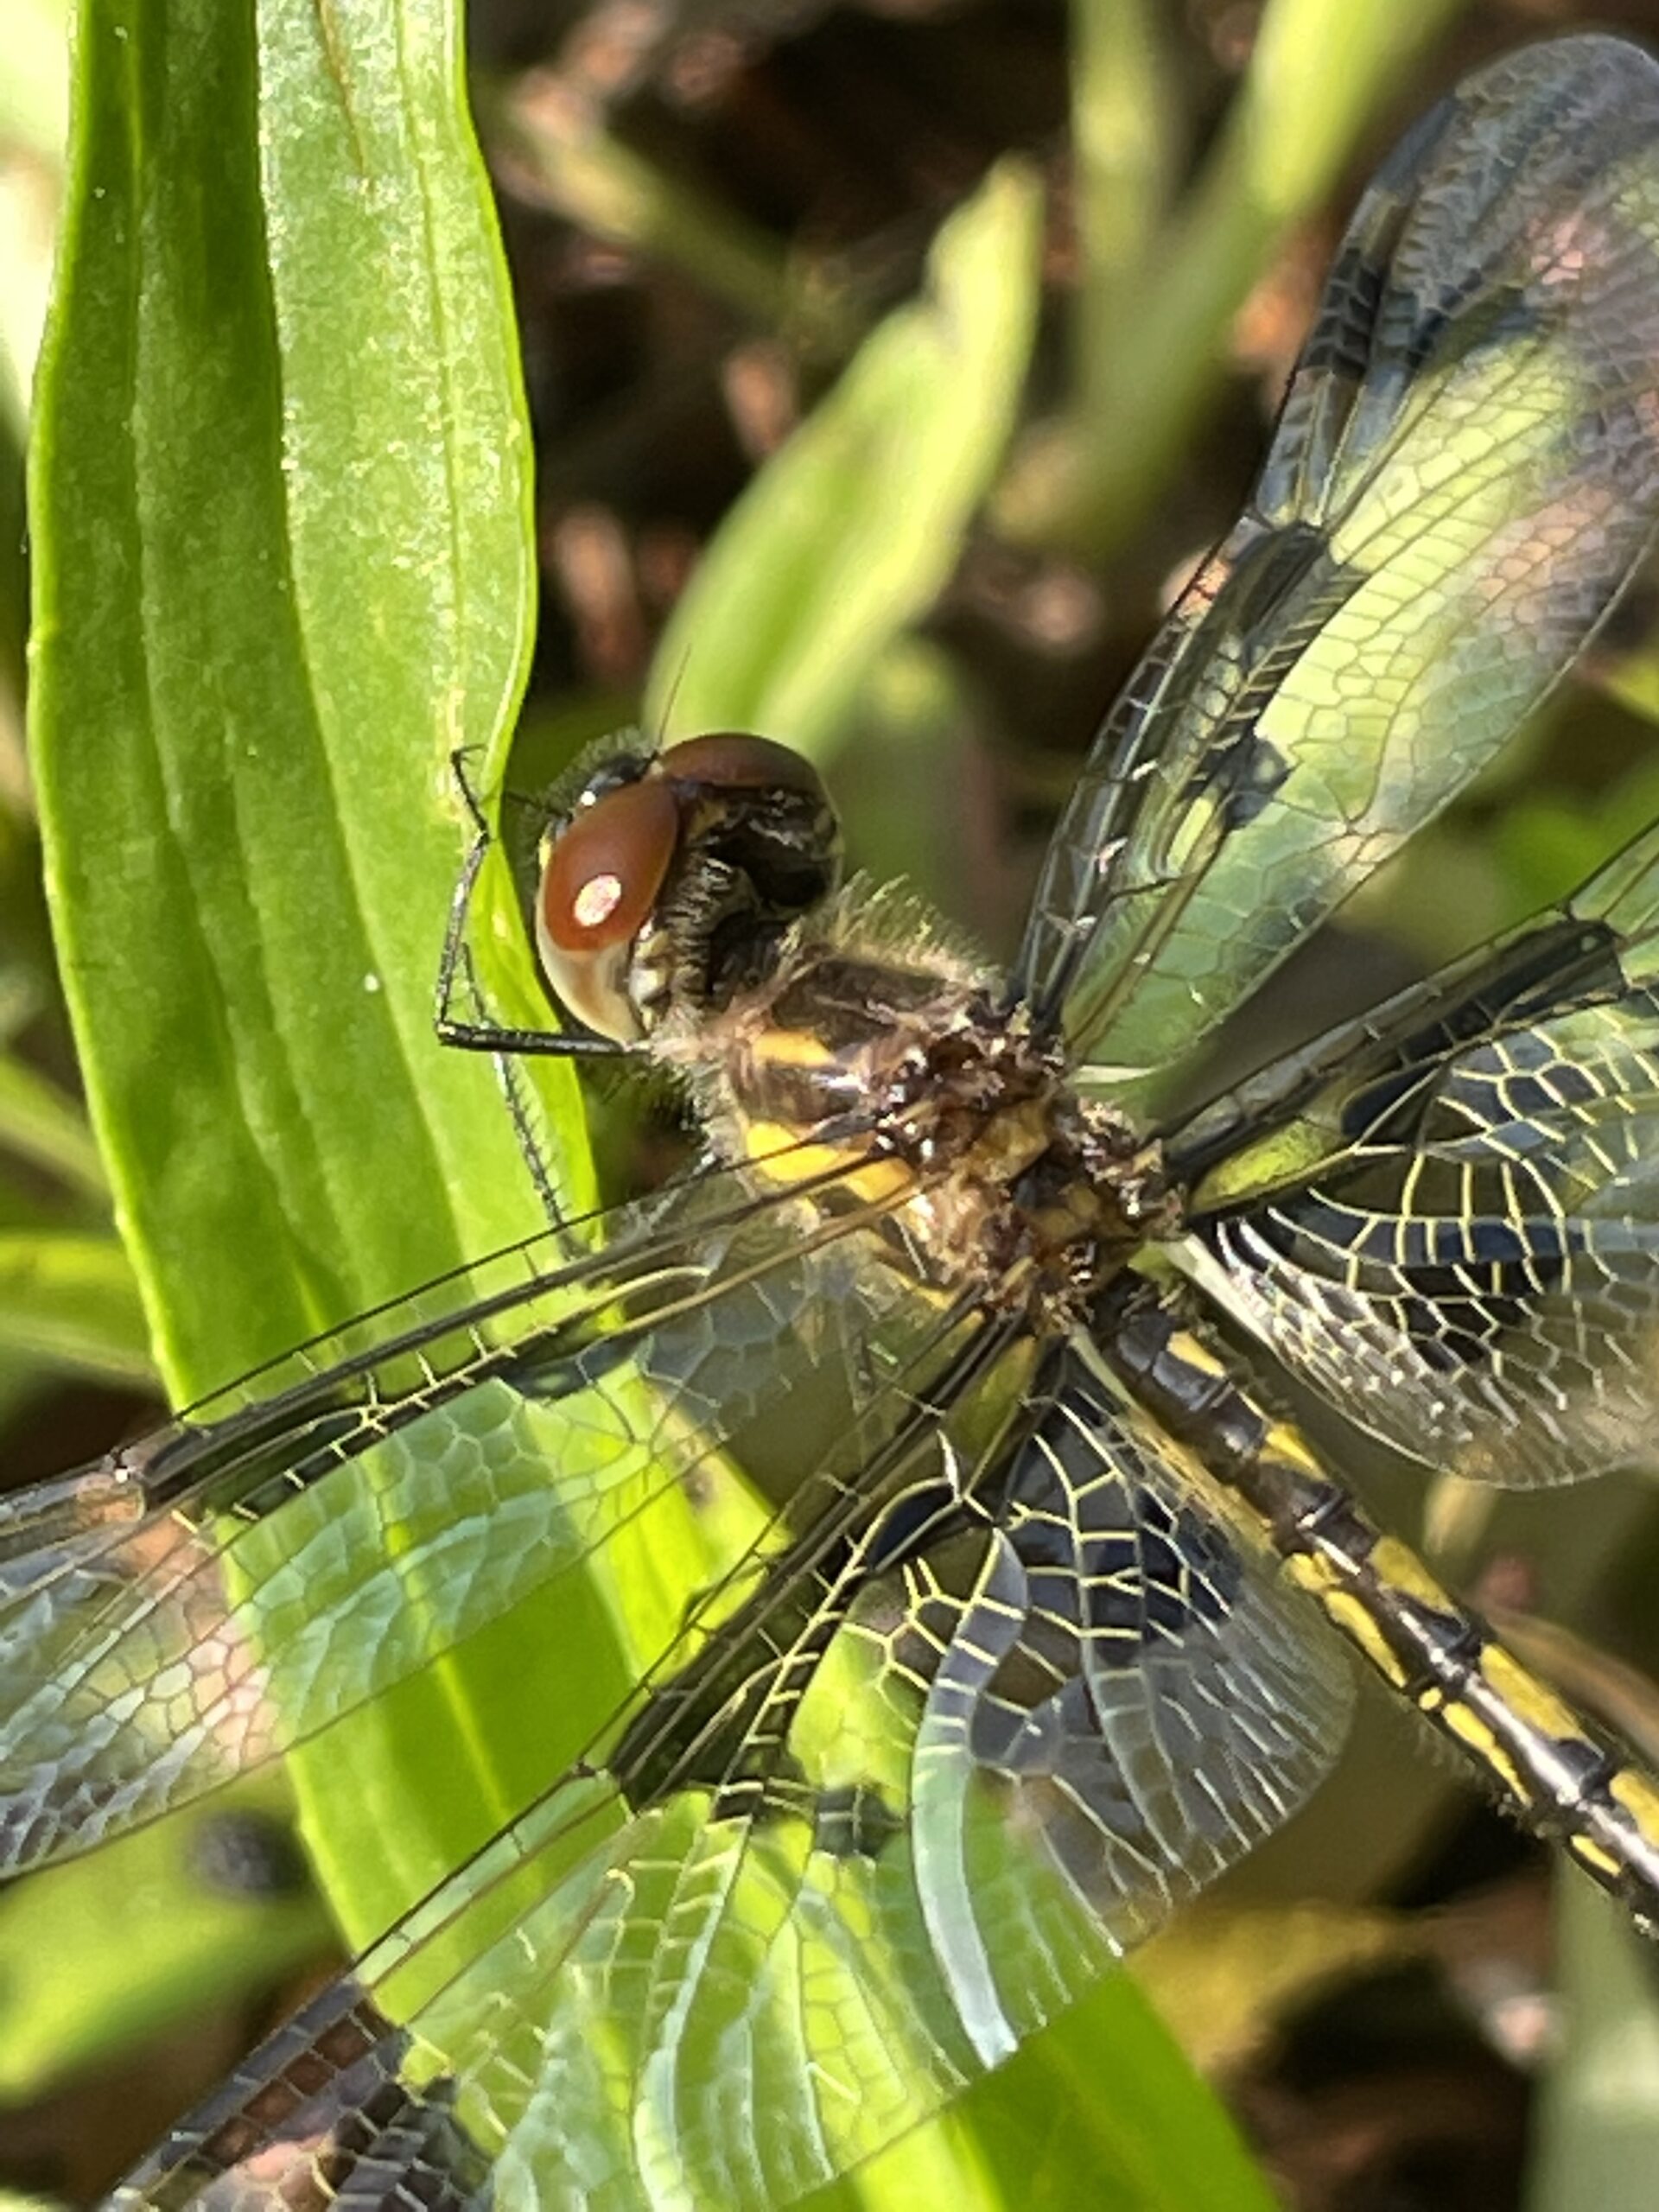 Dragonfly resting on a plant